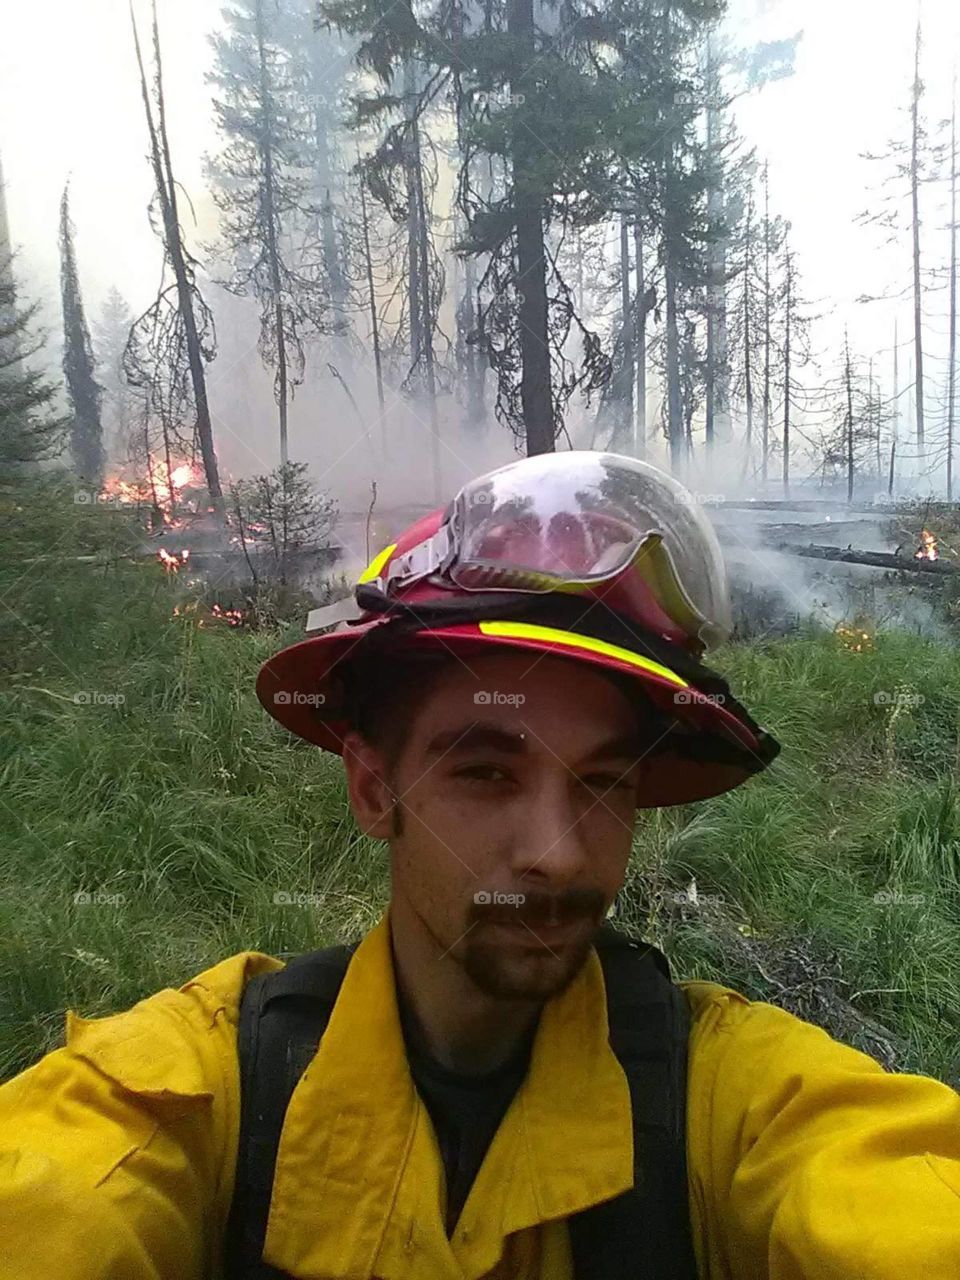 my brother working the fires